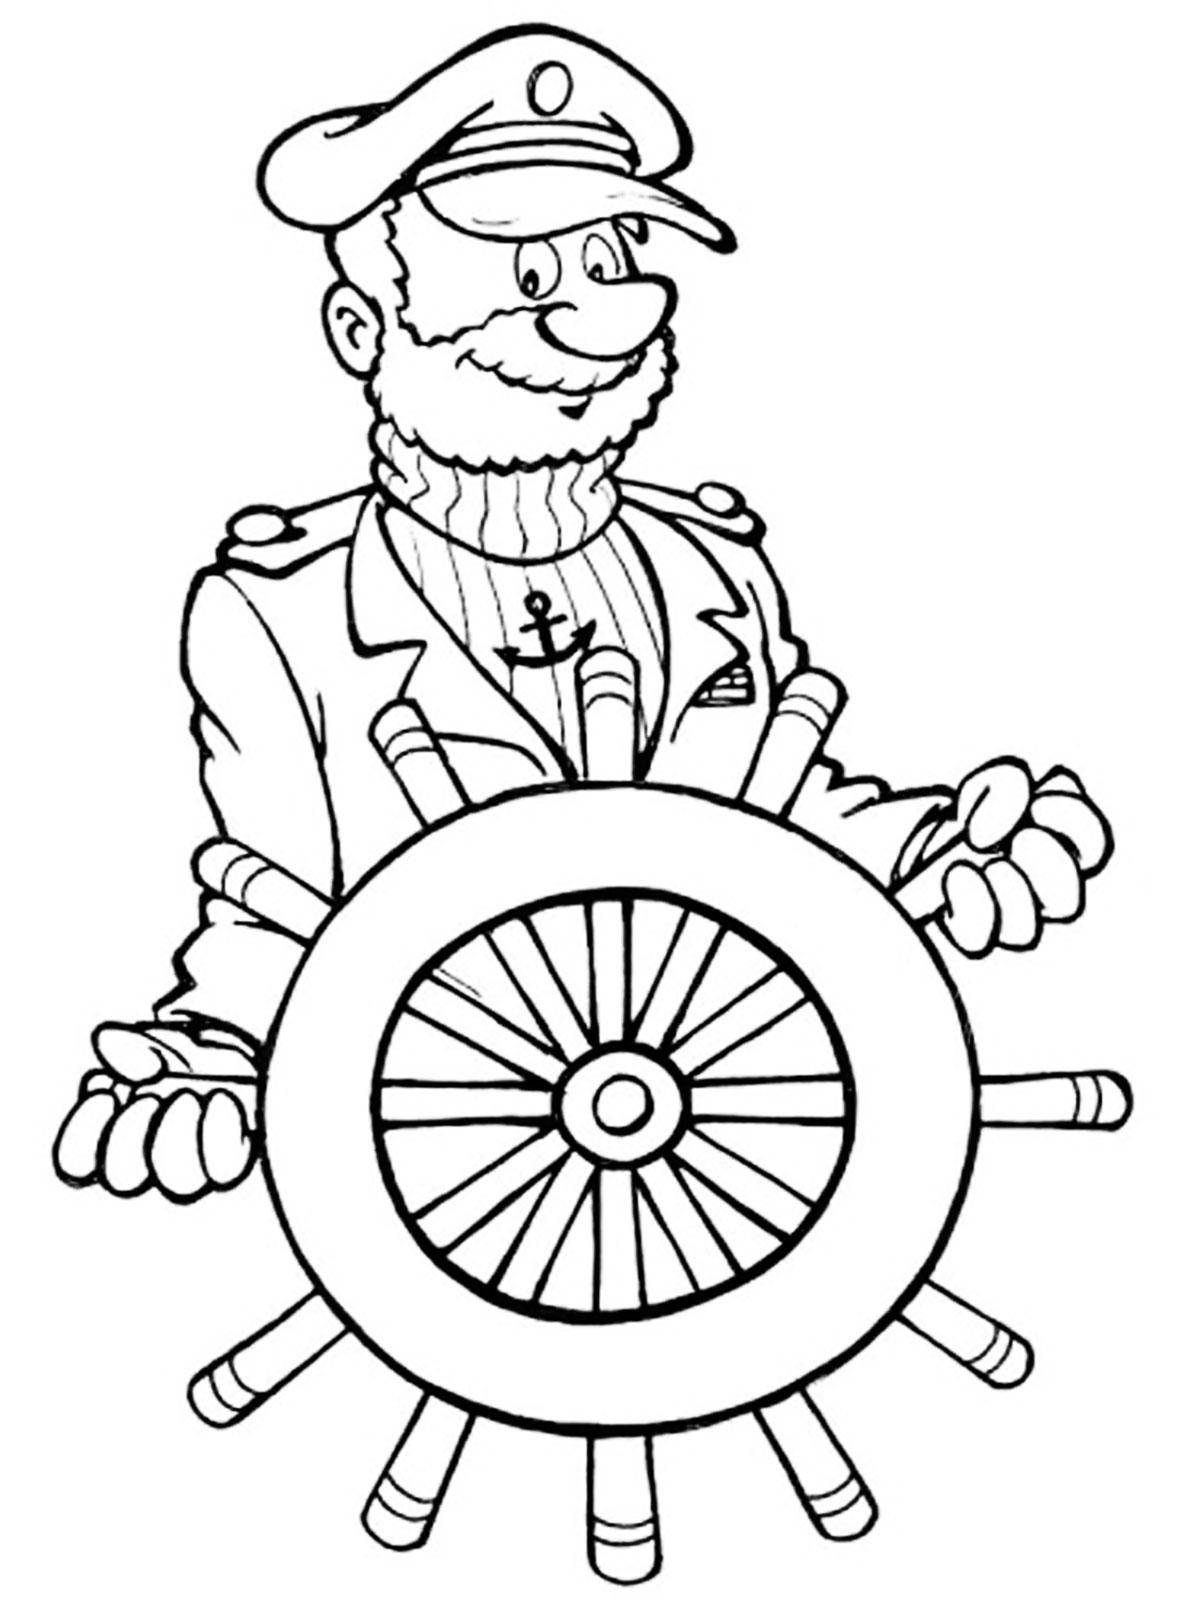 Coloring Sailor. Category a profession. Tags:  profession, sailors.